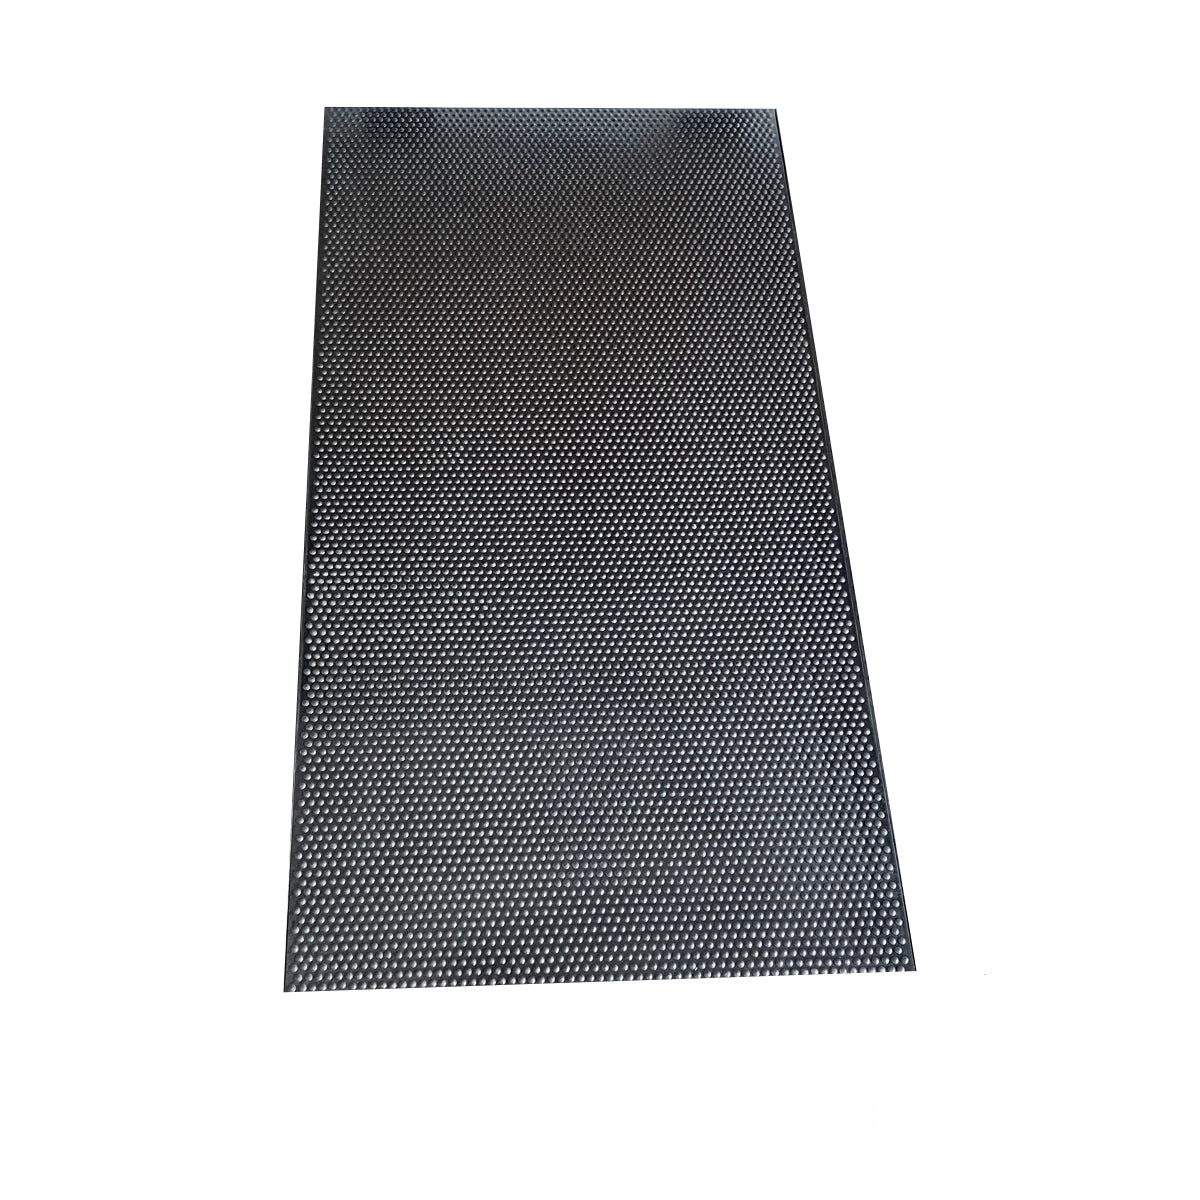 Black rubber mat for stable